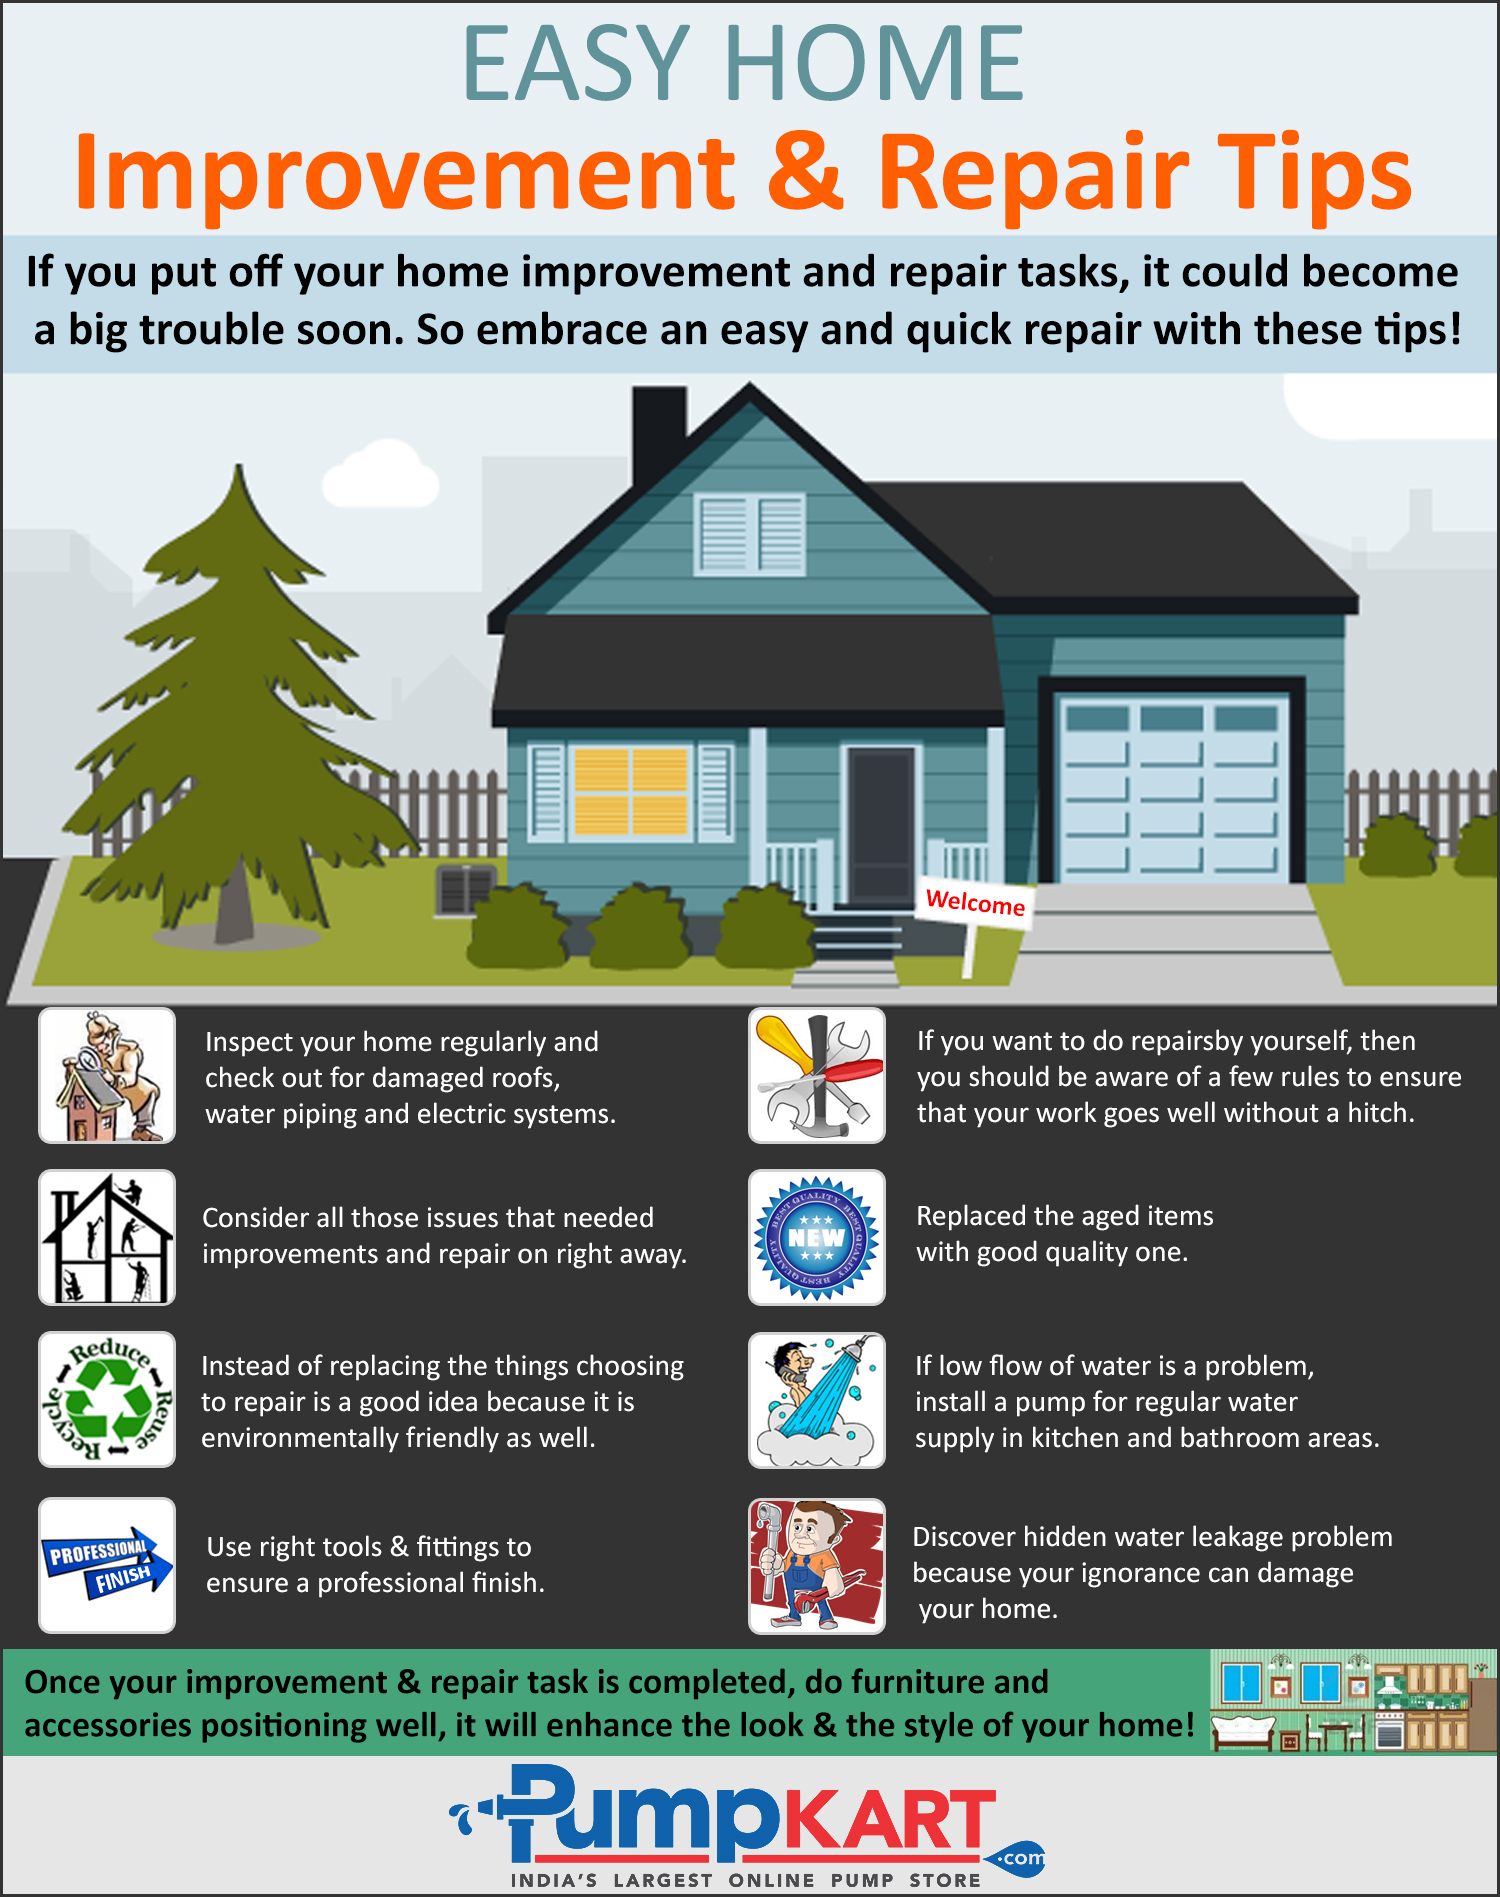 Home Improvement - Home Upgrade & Repair Guides And Tips - Homely